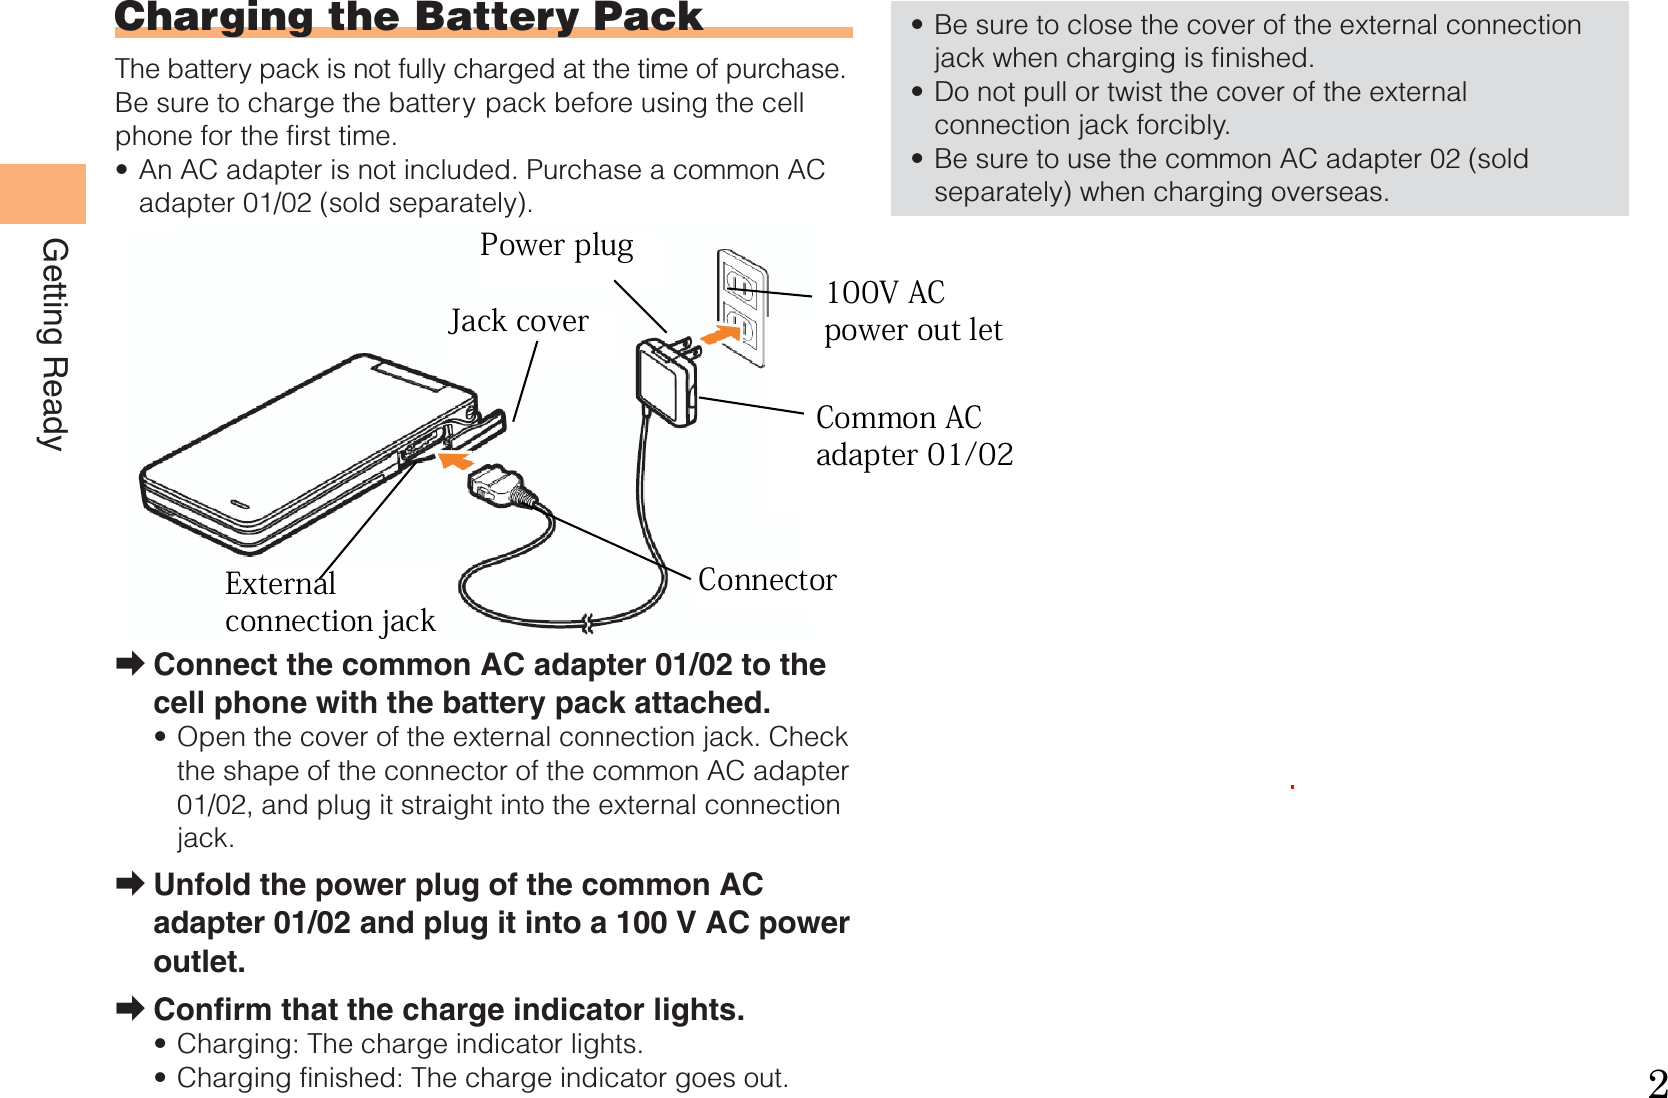 8Getting ReadyCharging the Battery PackThe battery pack is not fully charged at the time of purchase.Be sure to charge the battery pack before using the cell phone for the first time.An AC adapter is not included. Purchase a common AC adapter 01/02 (sold separately).Connect the common AC adapter 01/02 to the cell phone with the battery pack attached.Open the cover of the external connection jack. Check the shape of the connector of the common AC adapter 01/02, and plug it straight into the external connection jack.Unfold the power plug of the common AC adapter 01/02 and plug it into a 100 V AC power outlet.Confirm that the charge indicator lights.Charging: The charge indicator lights.Charging finished: The charge indicator goes out.•➡•➡➡••Be sure to close the cover of the external connection jack when charging is finished.Do not pull or twist the cover of the external connection jack forcibly.Be sure to use the common AC adapter 02 (sold separately) when charging overseas.•••CommonAC adapter 01/02100 V AC power outletPowerplugCharge indicatorConnectorExternal connection jackCommonAC adapter 01/02100 V AC power outletPowerplugCharge indicatorConnectorExternal connection jack   External  connection jackJack cover 100V AC  power out letCommon AC adapter 01/02ConnectorPower plug2100V AC power out letCommon AC adapter 01/02ConnectorJack coverPower plugExternal connection jack